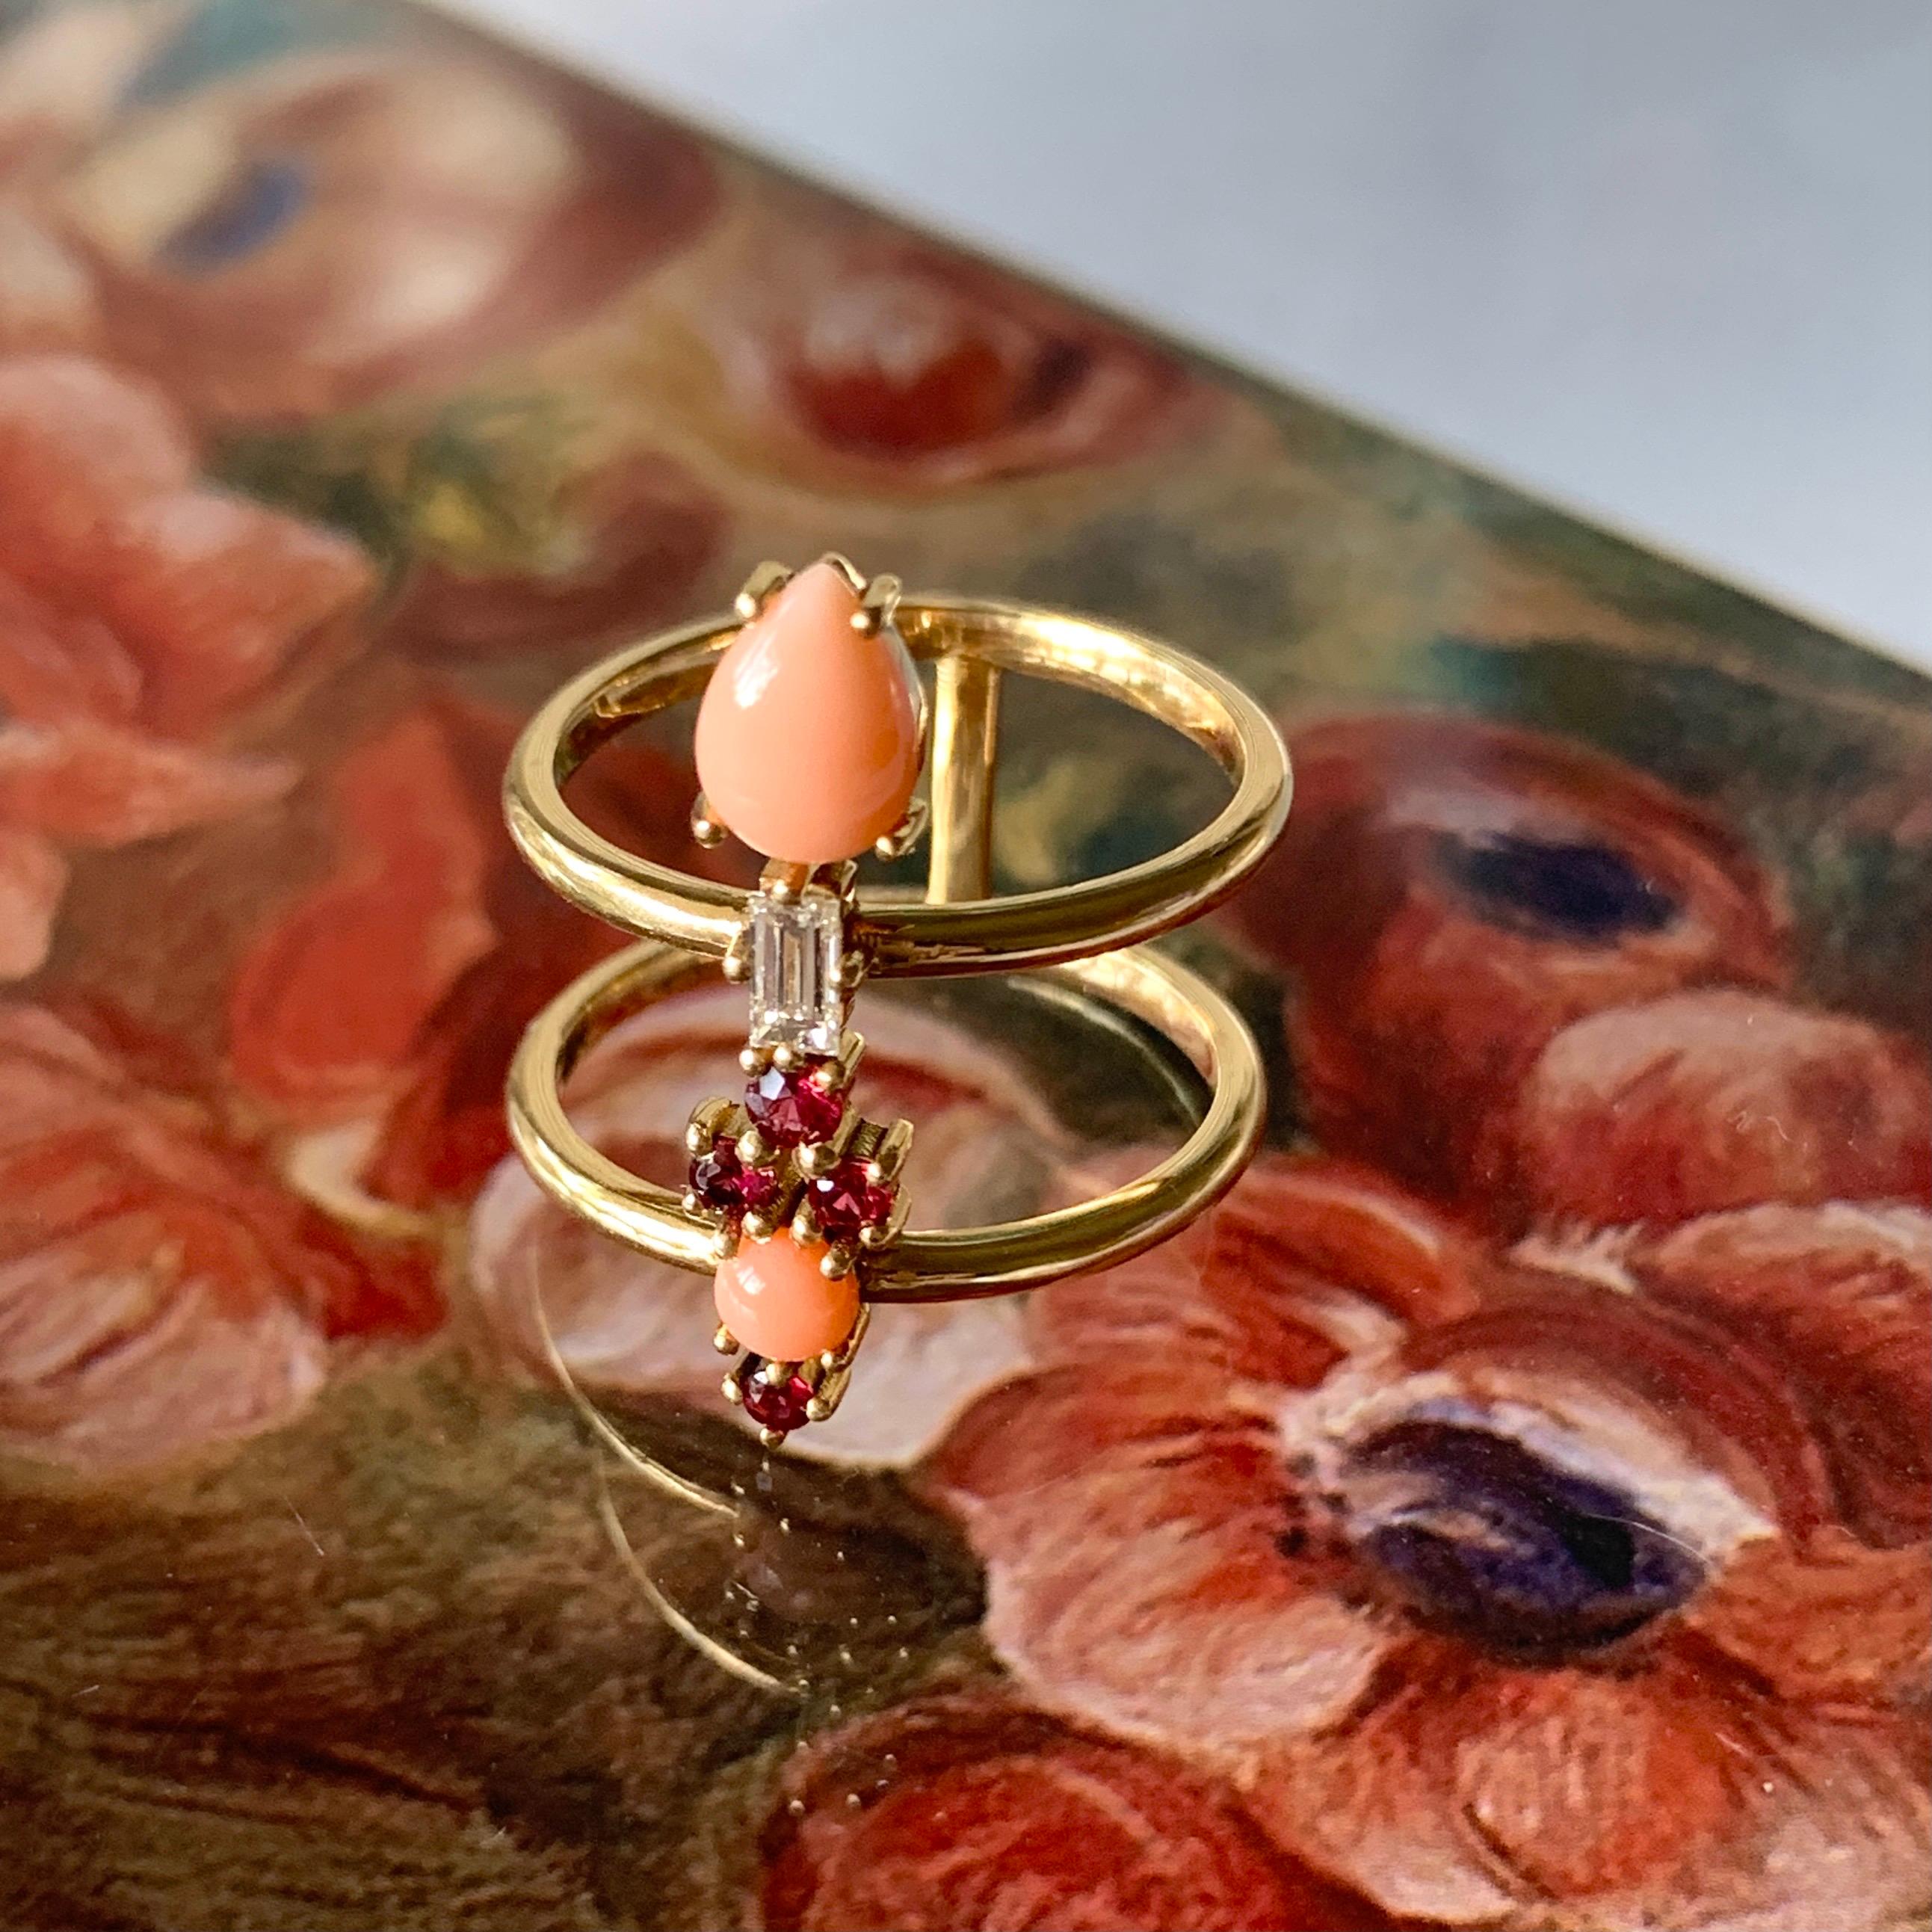 Colorful 18 Karat Gold Ring with Spinels, Corals and a Baguette Diamond 1